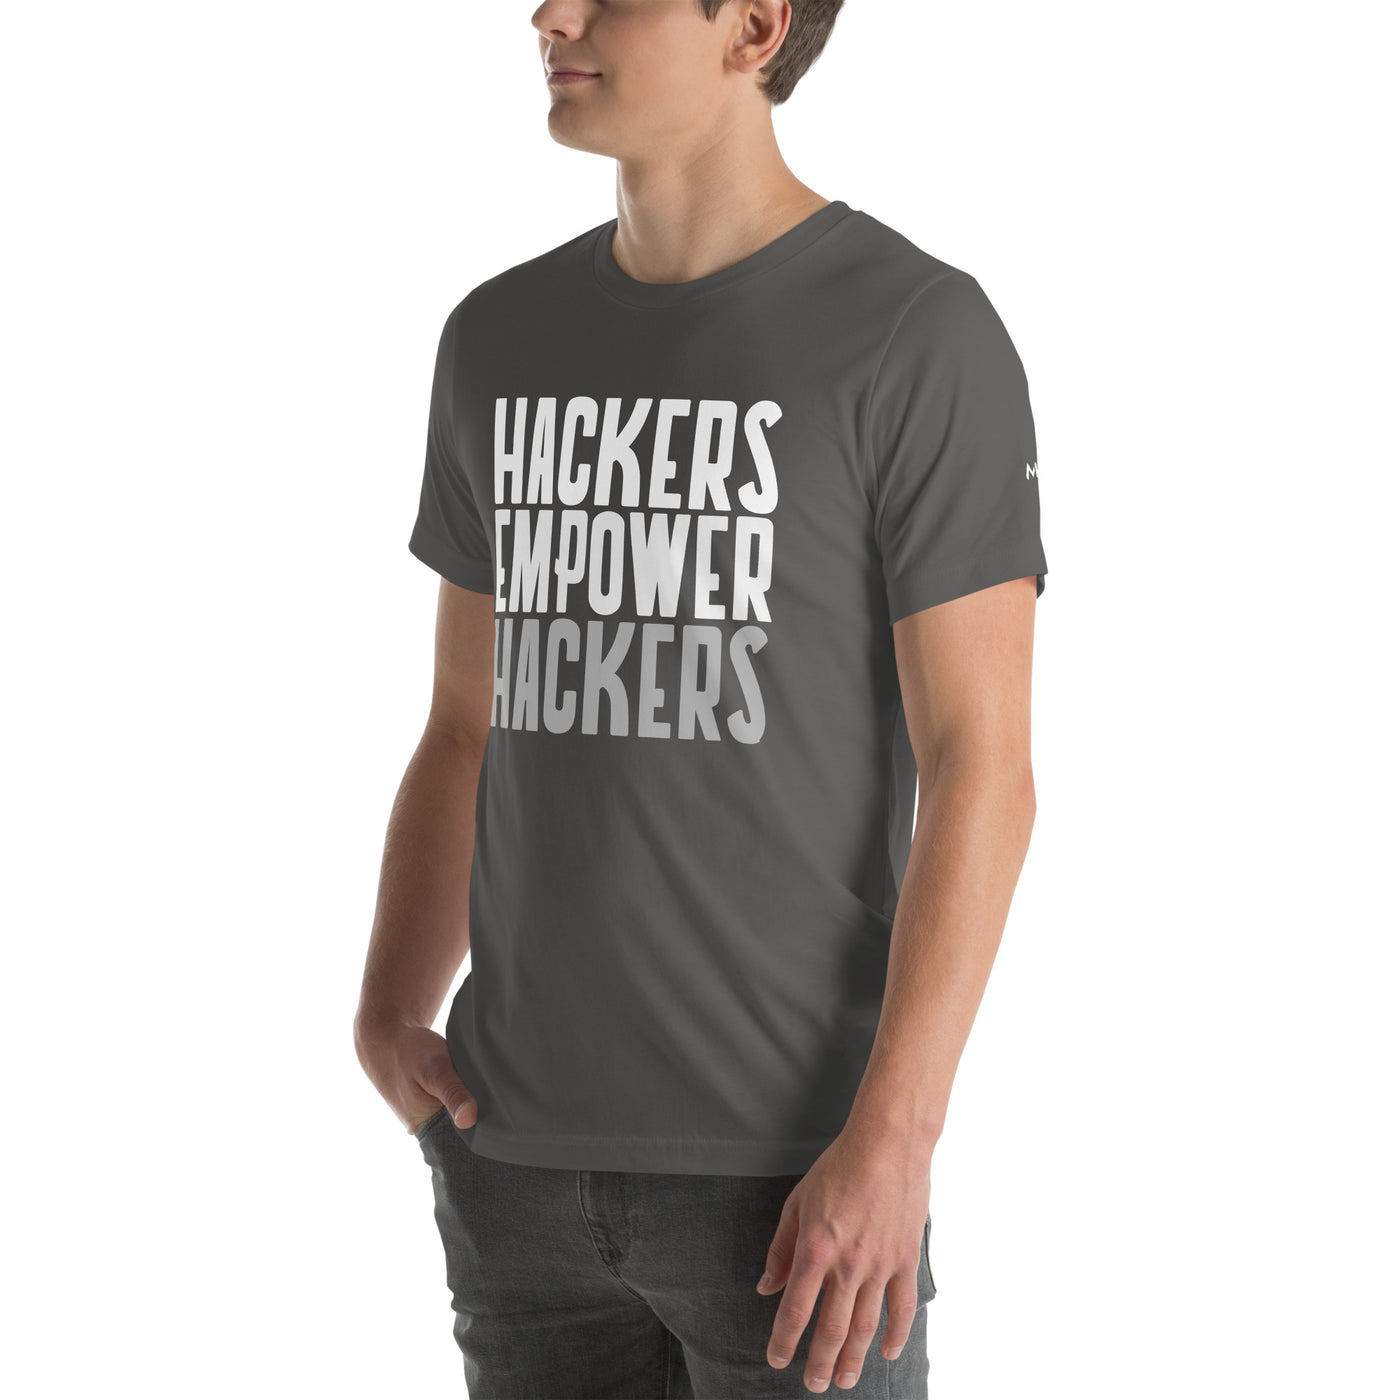 Hackers Empower Hackers - Unisex t-shirt